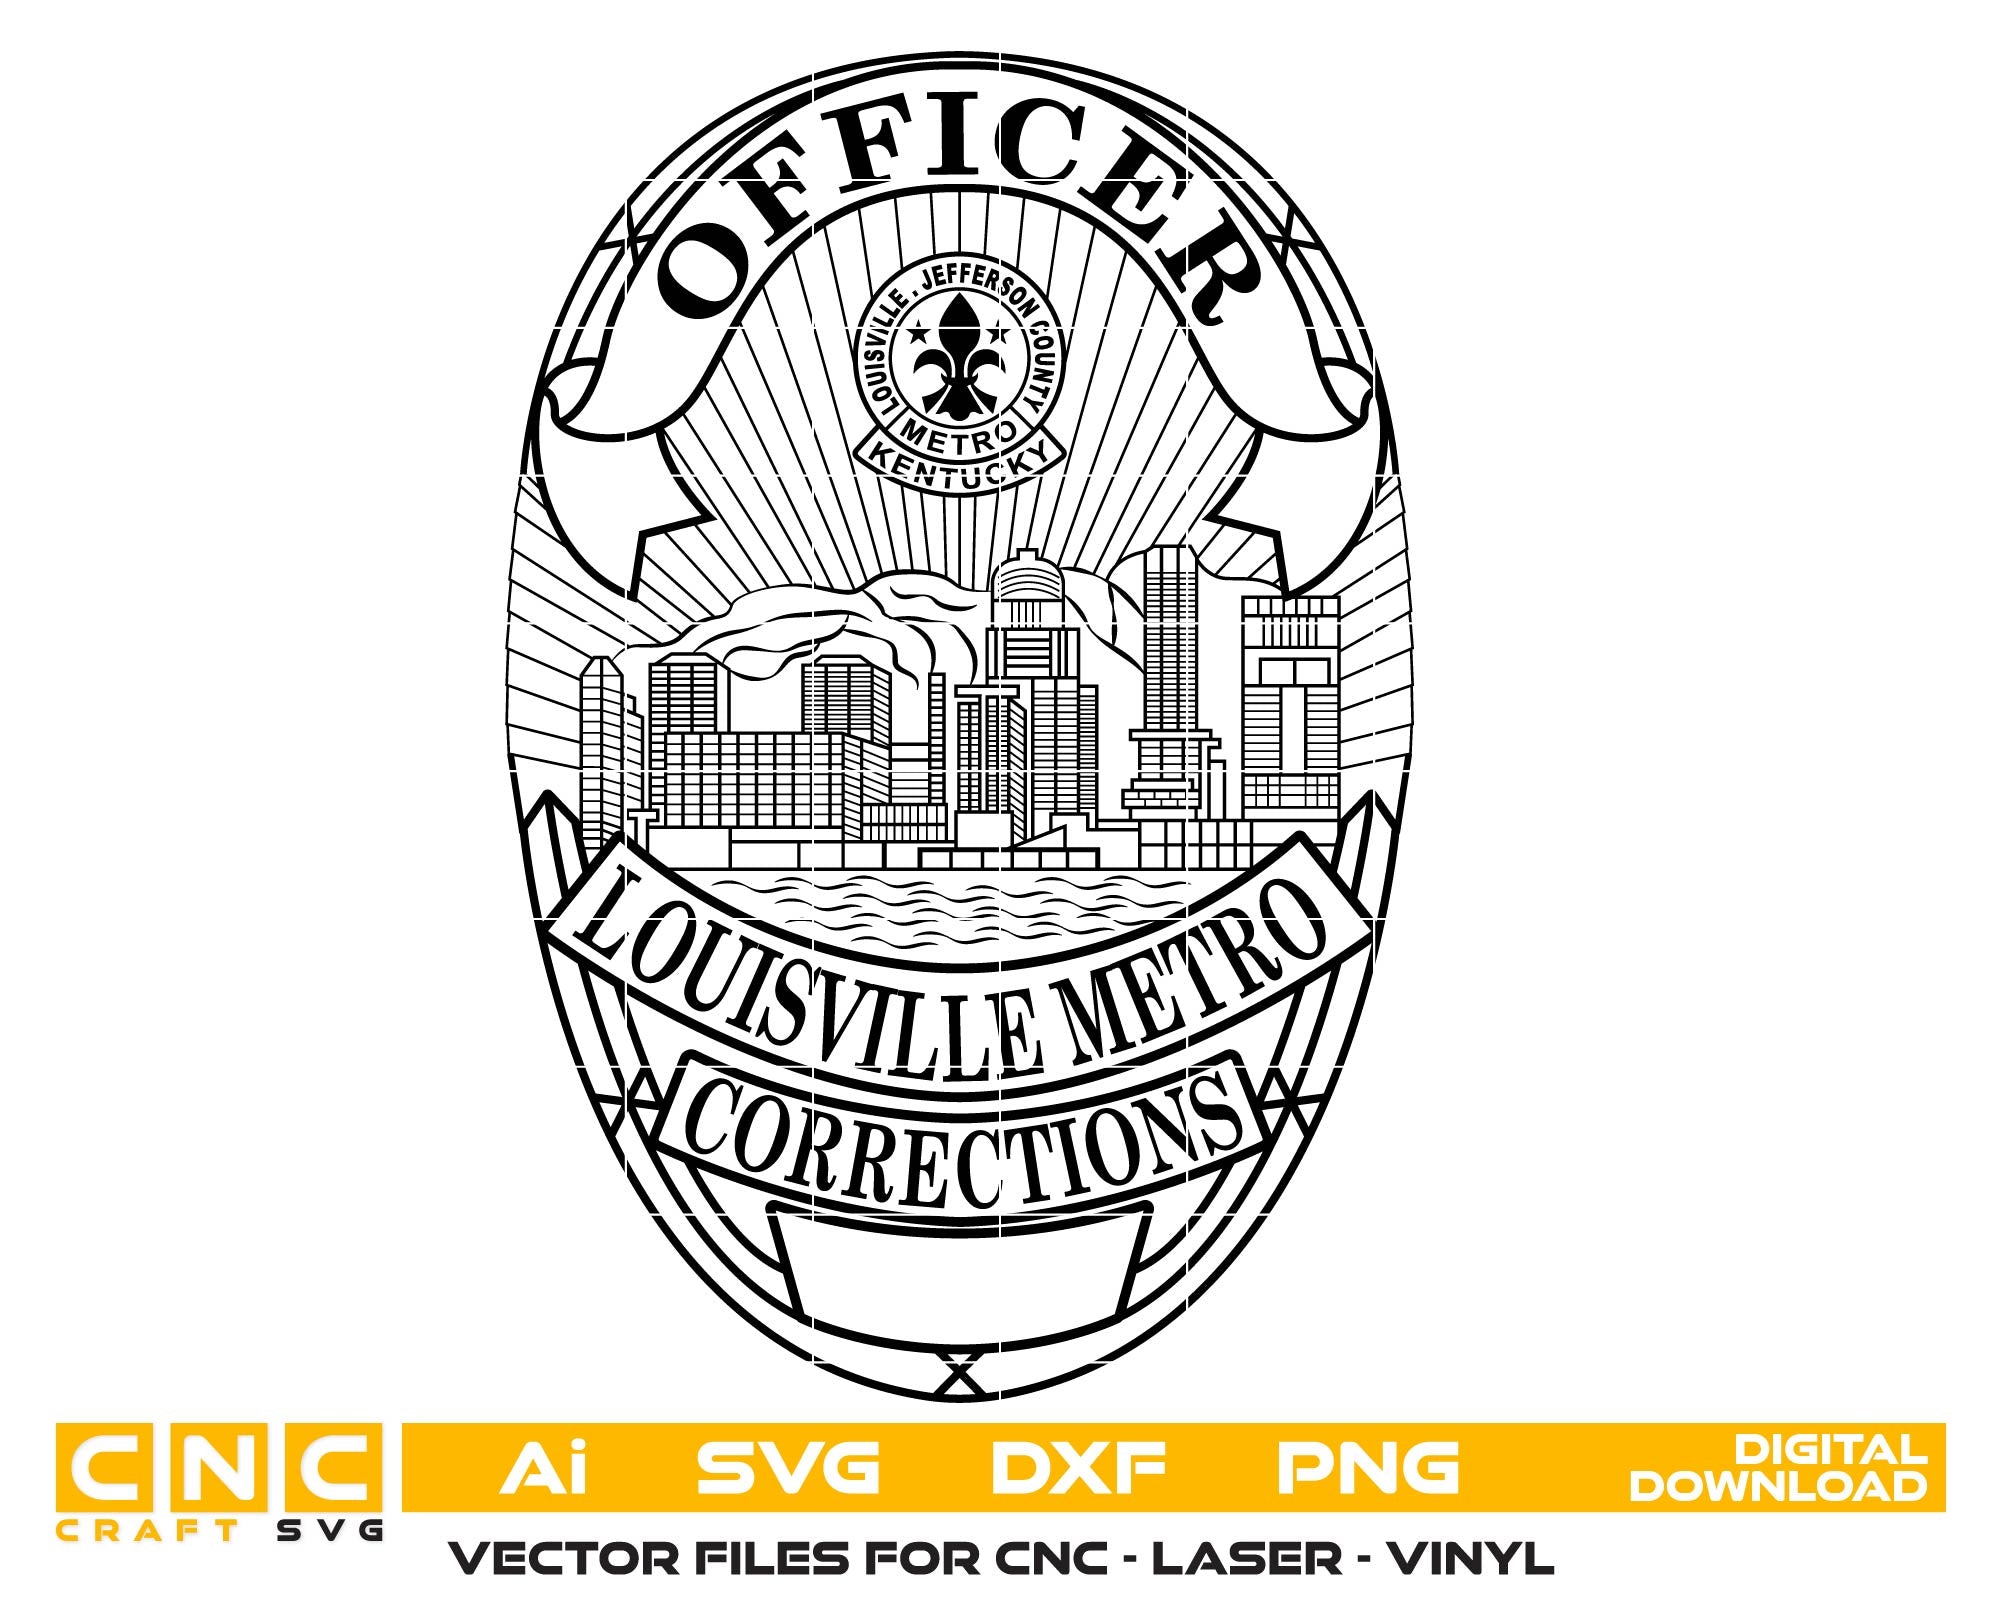 Louisville Metro Corrections Officer Badge Vector Art, Ai,SVG, DXF, PNG, Digital Files